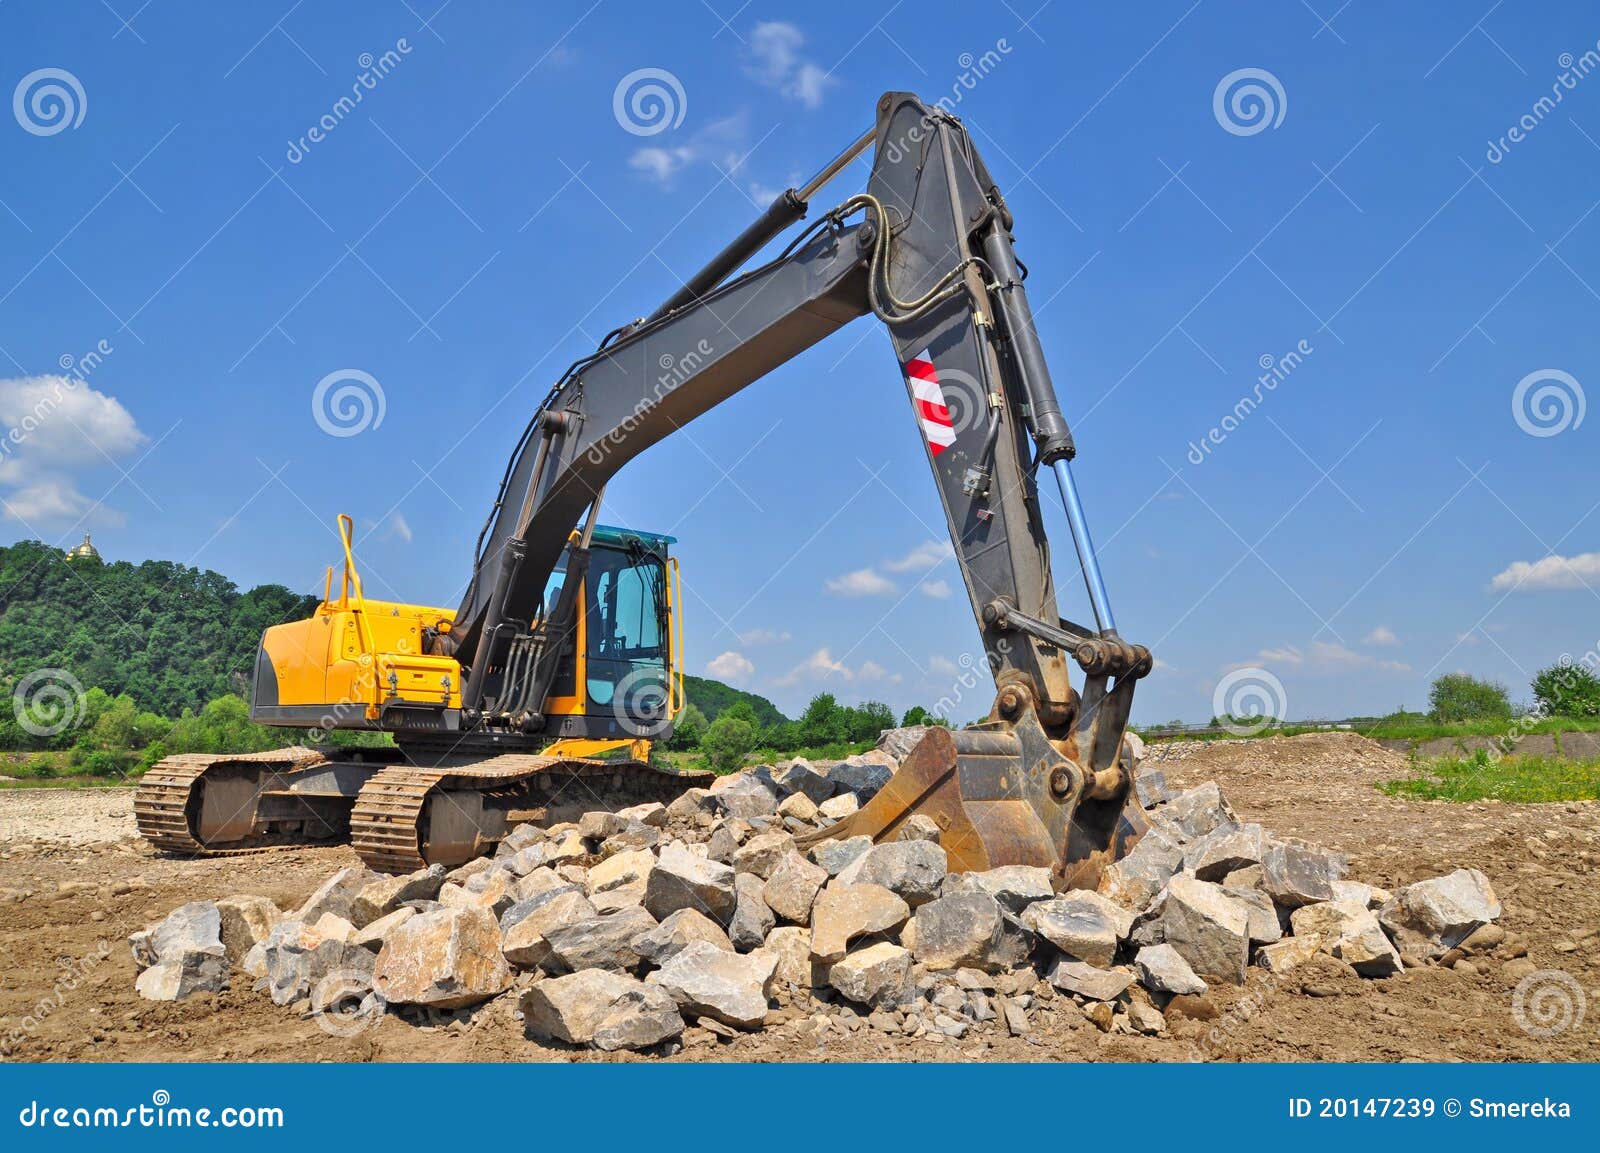 Dredge in a working zone stock image. Image of hydraulics - 20147239